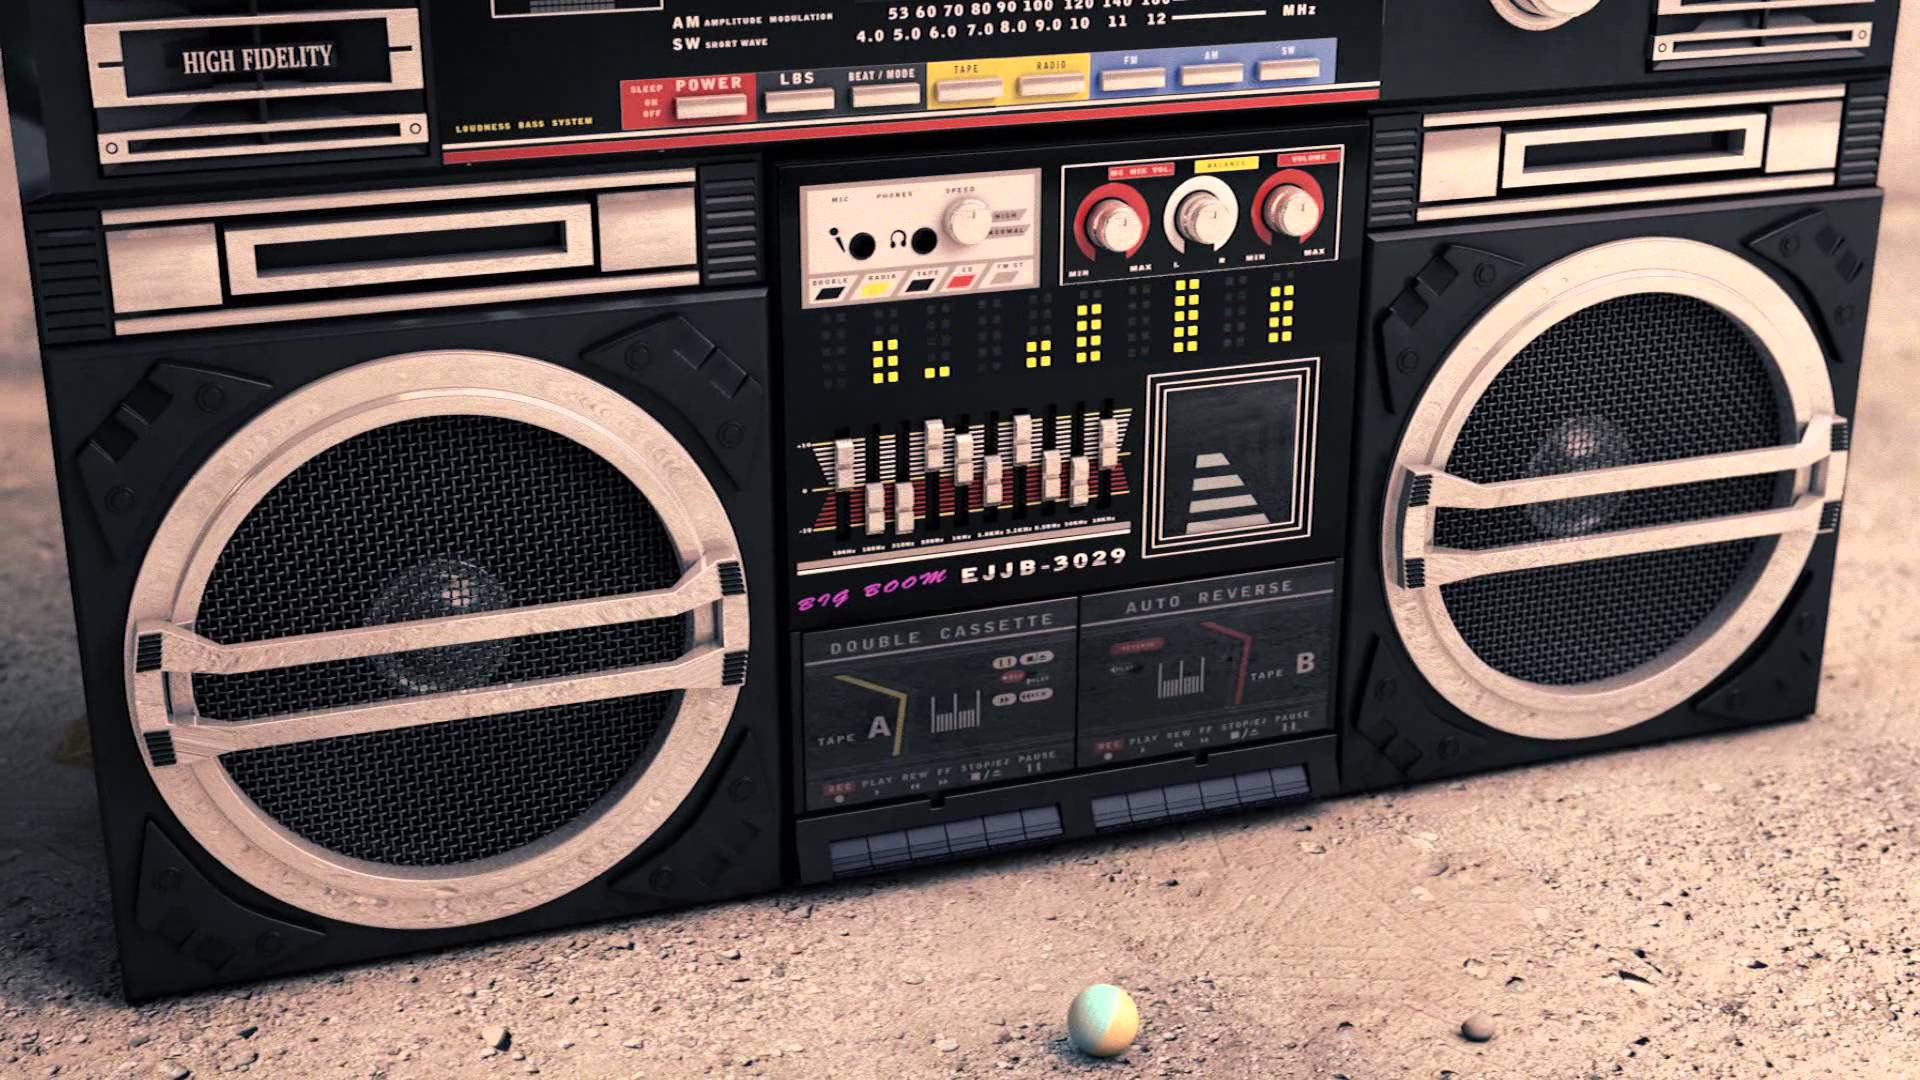 Colorful BoomBox Wallpaper 68658 1920x1080px